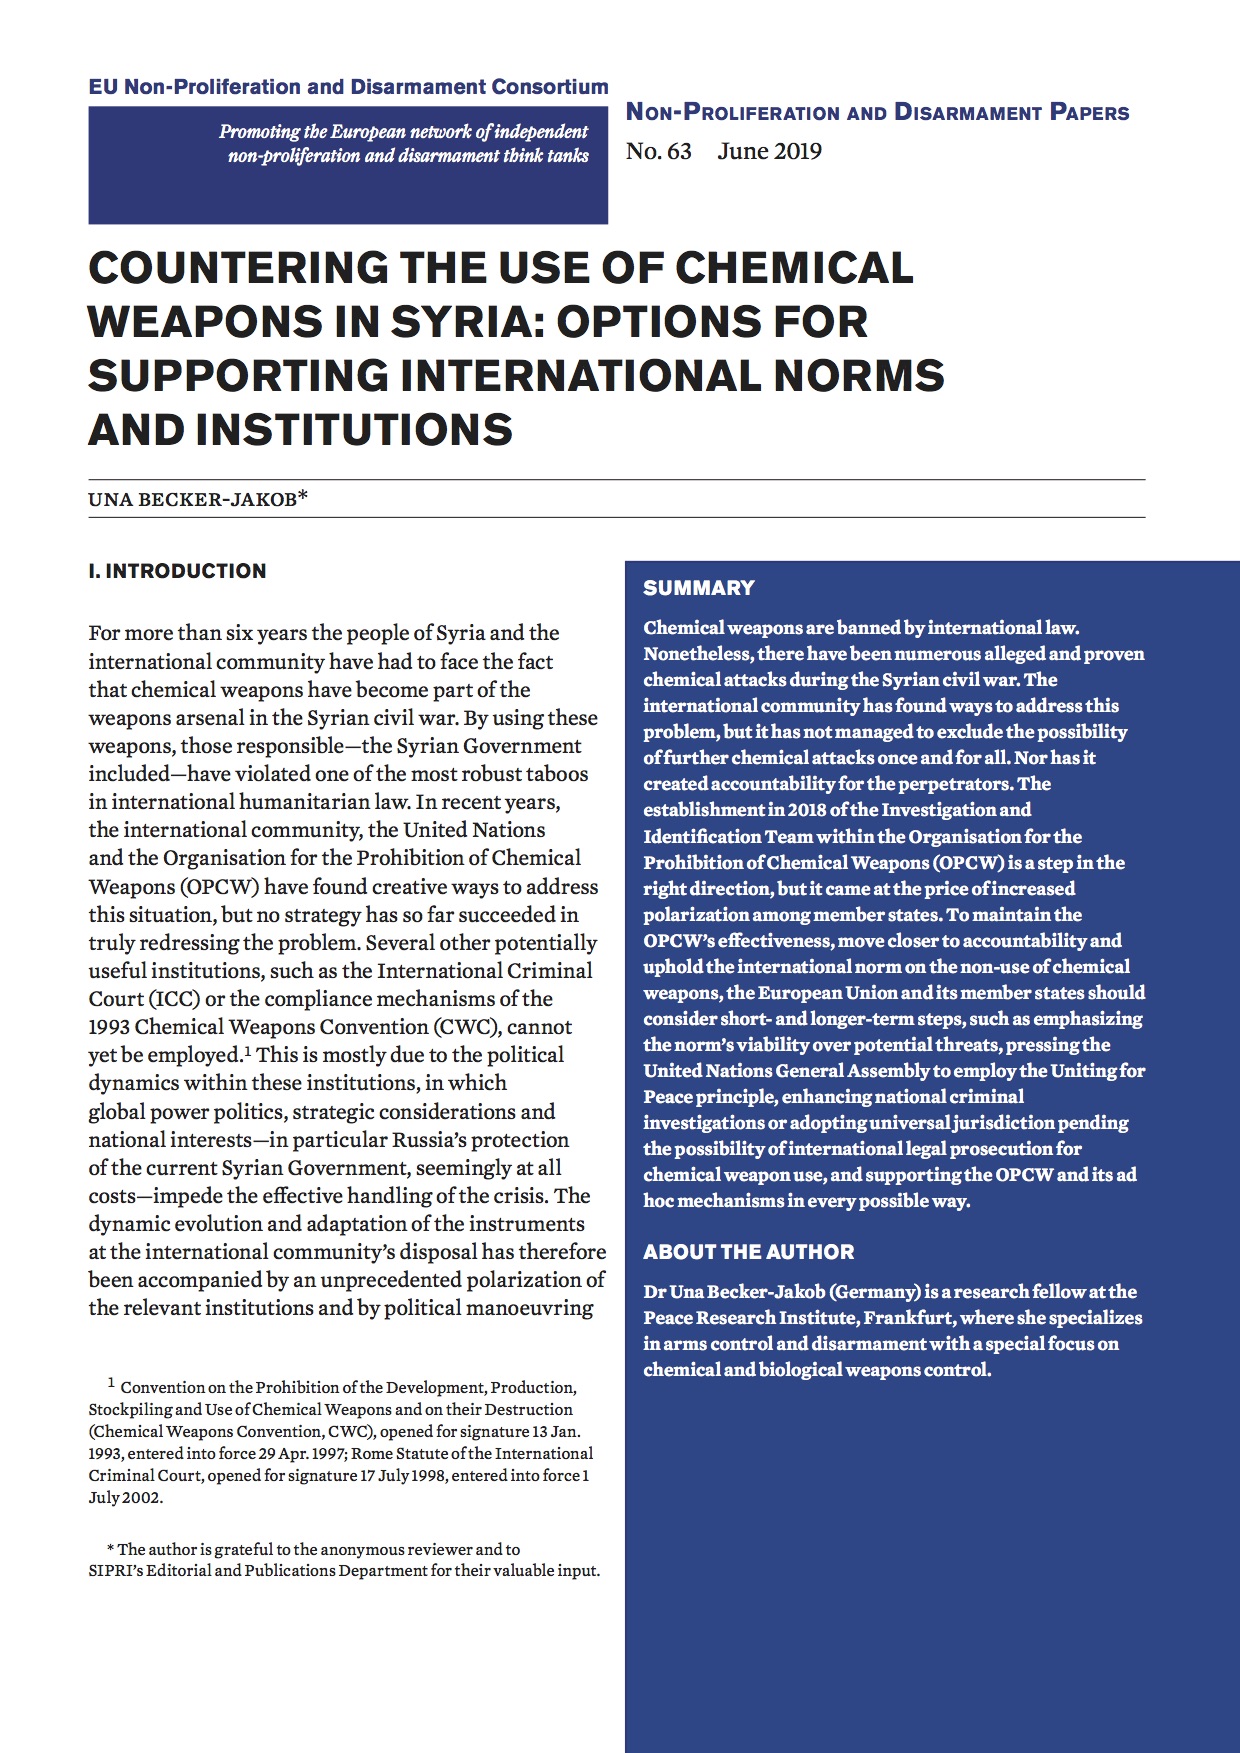 Countering the Use of Chemical Weapons in Syria: Options for